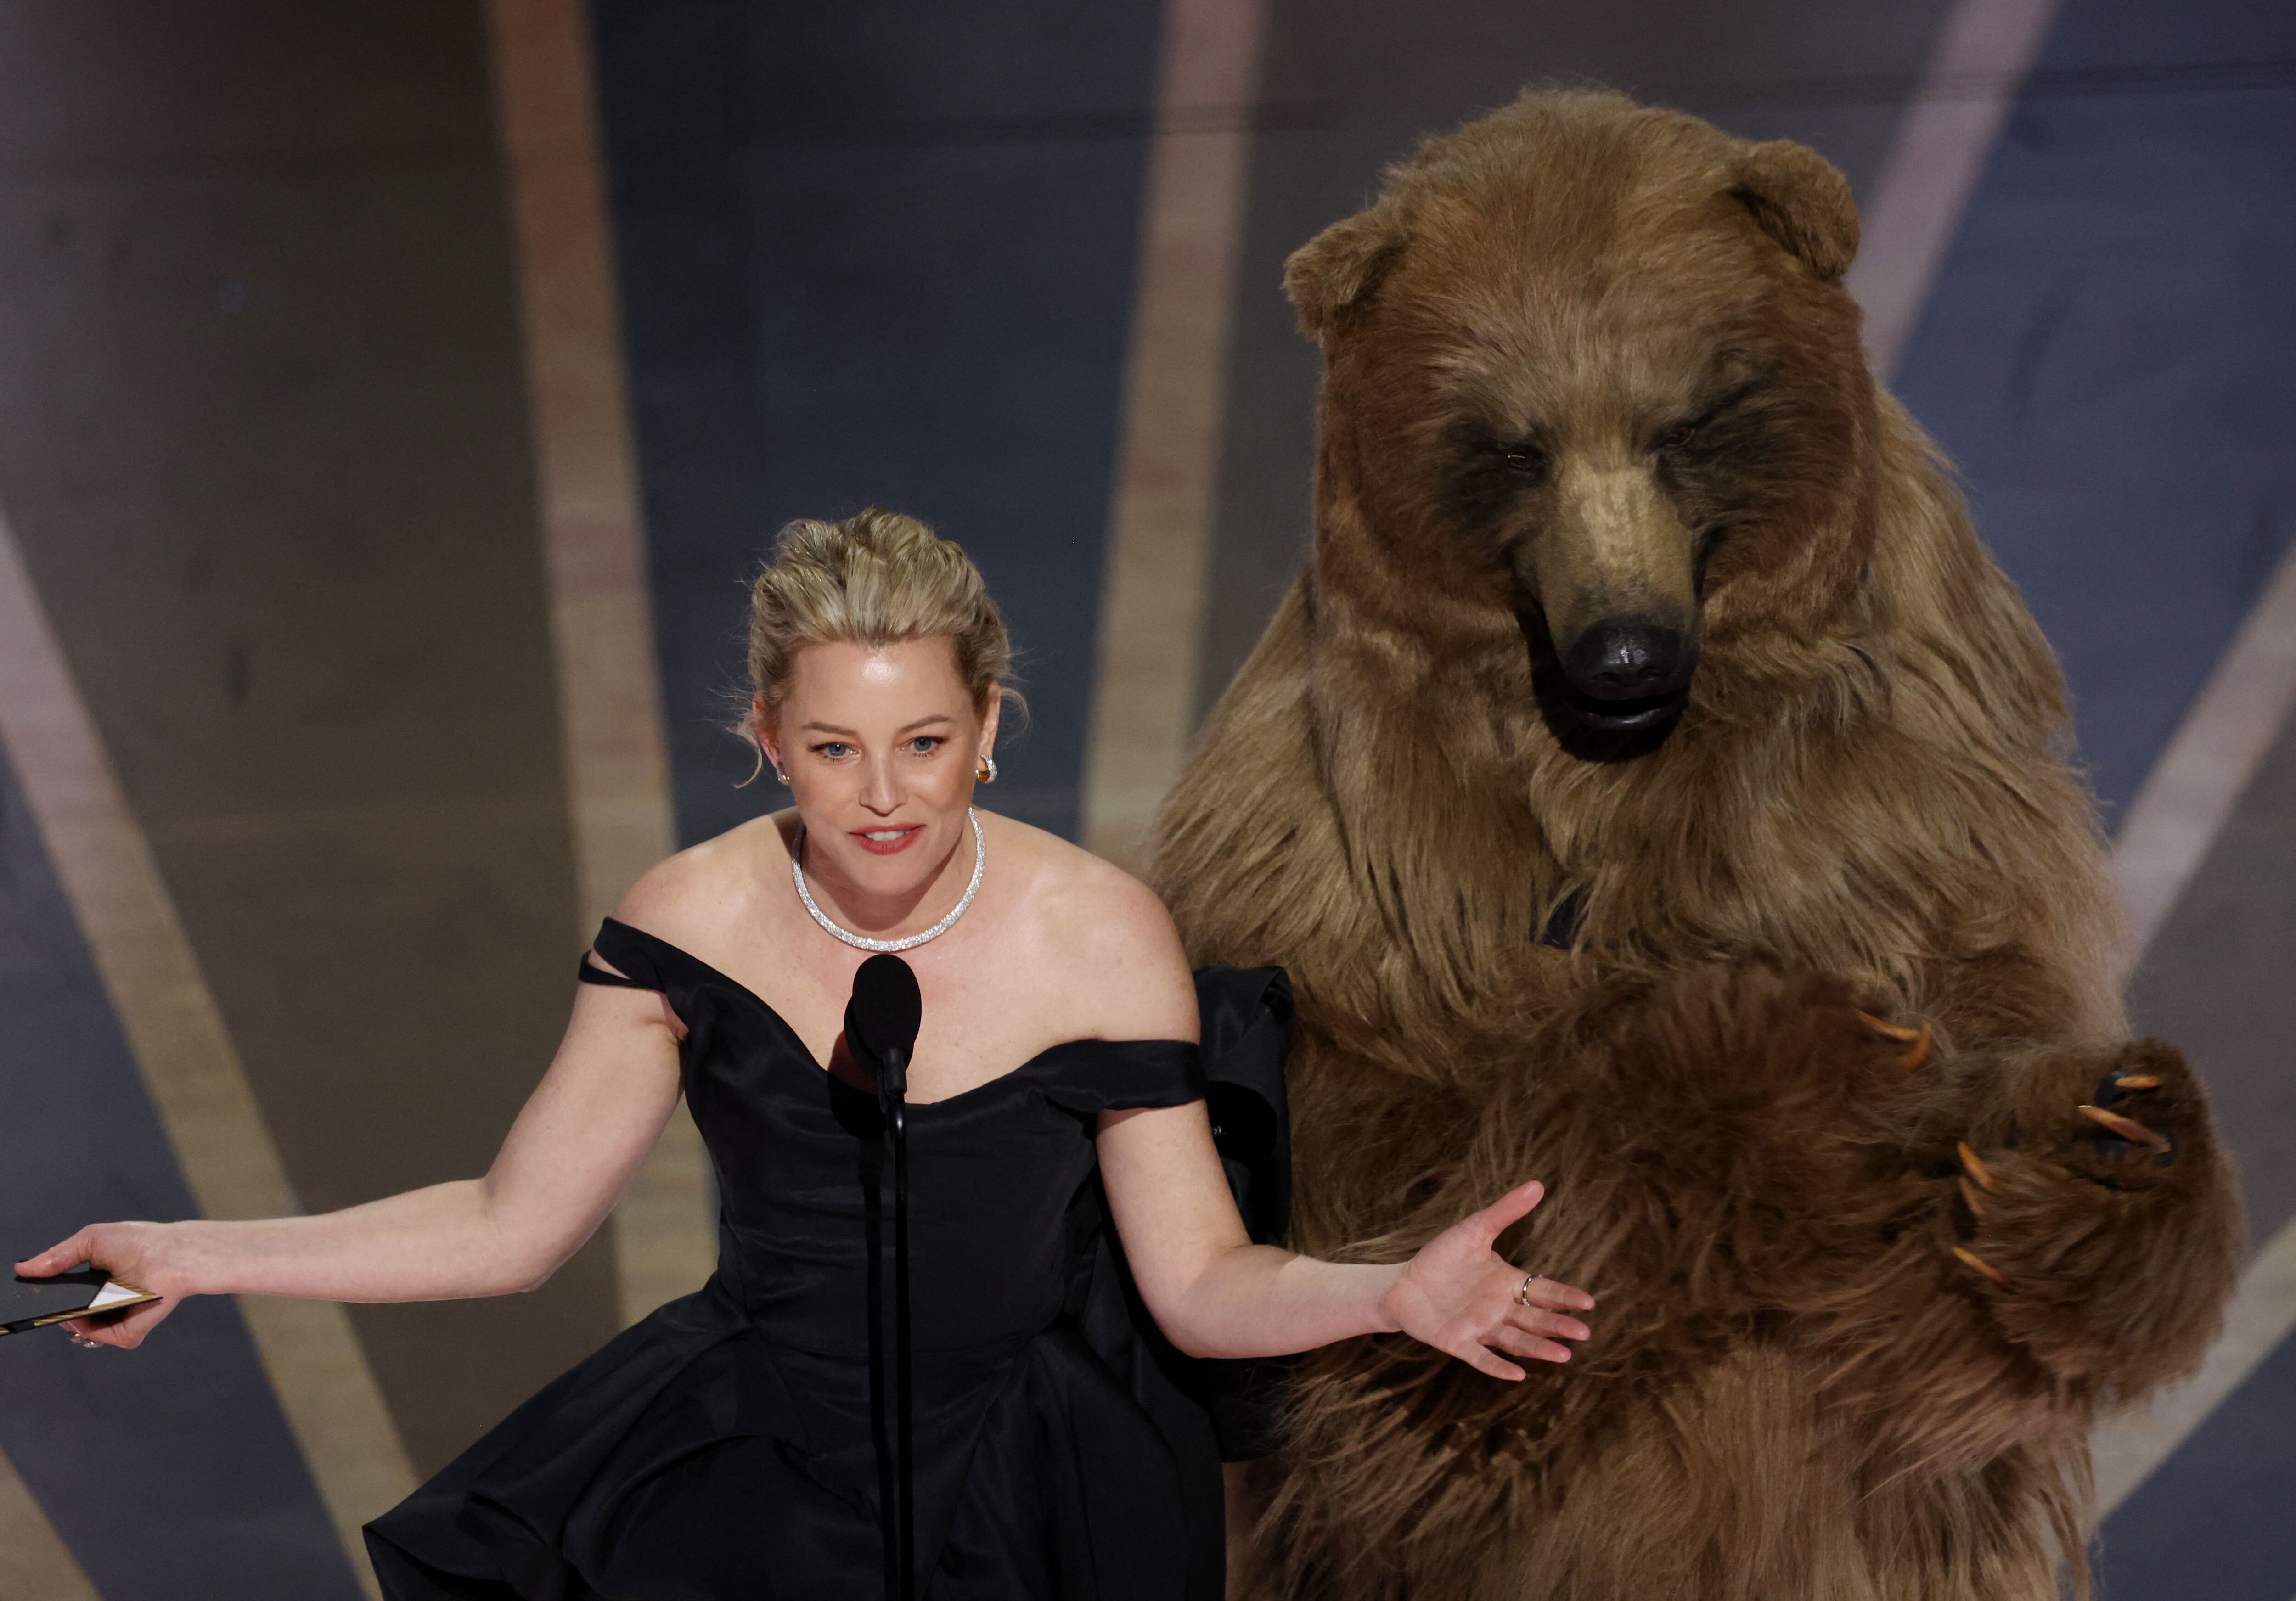 Elizabeth Banks is joined by an actor in a bear costume as she presents the award for Best Visual Effects during the Oscars show at the 95th Academy Awards in Hollywood, Los Angeles, California, U.S., March 12, 2023. REUTERS/Carlos Barria